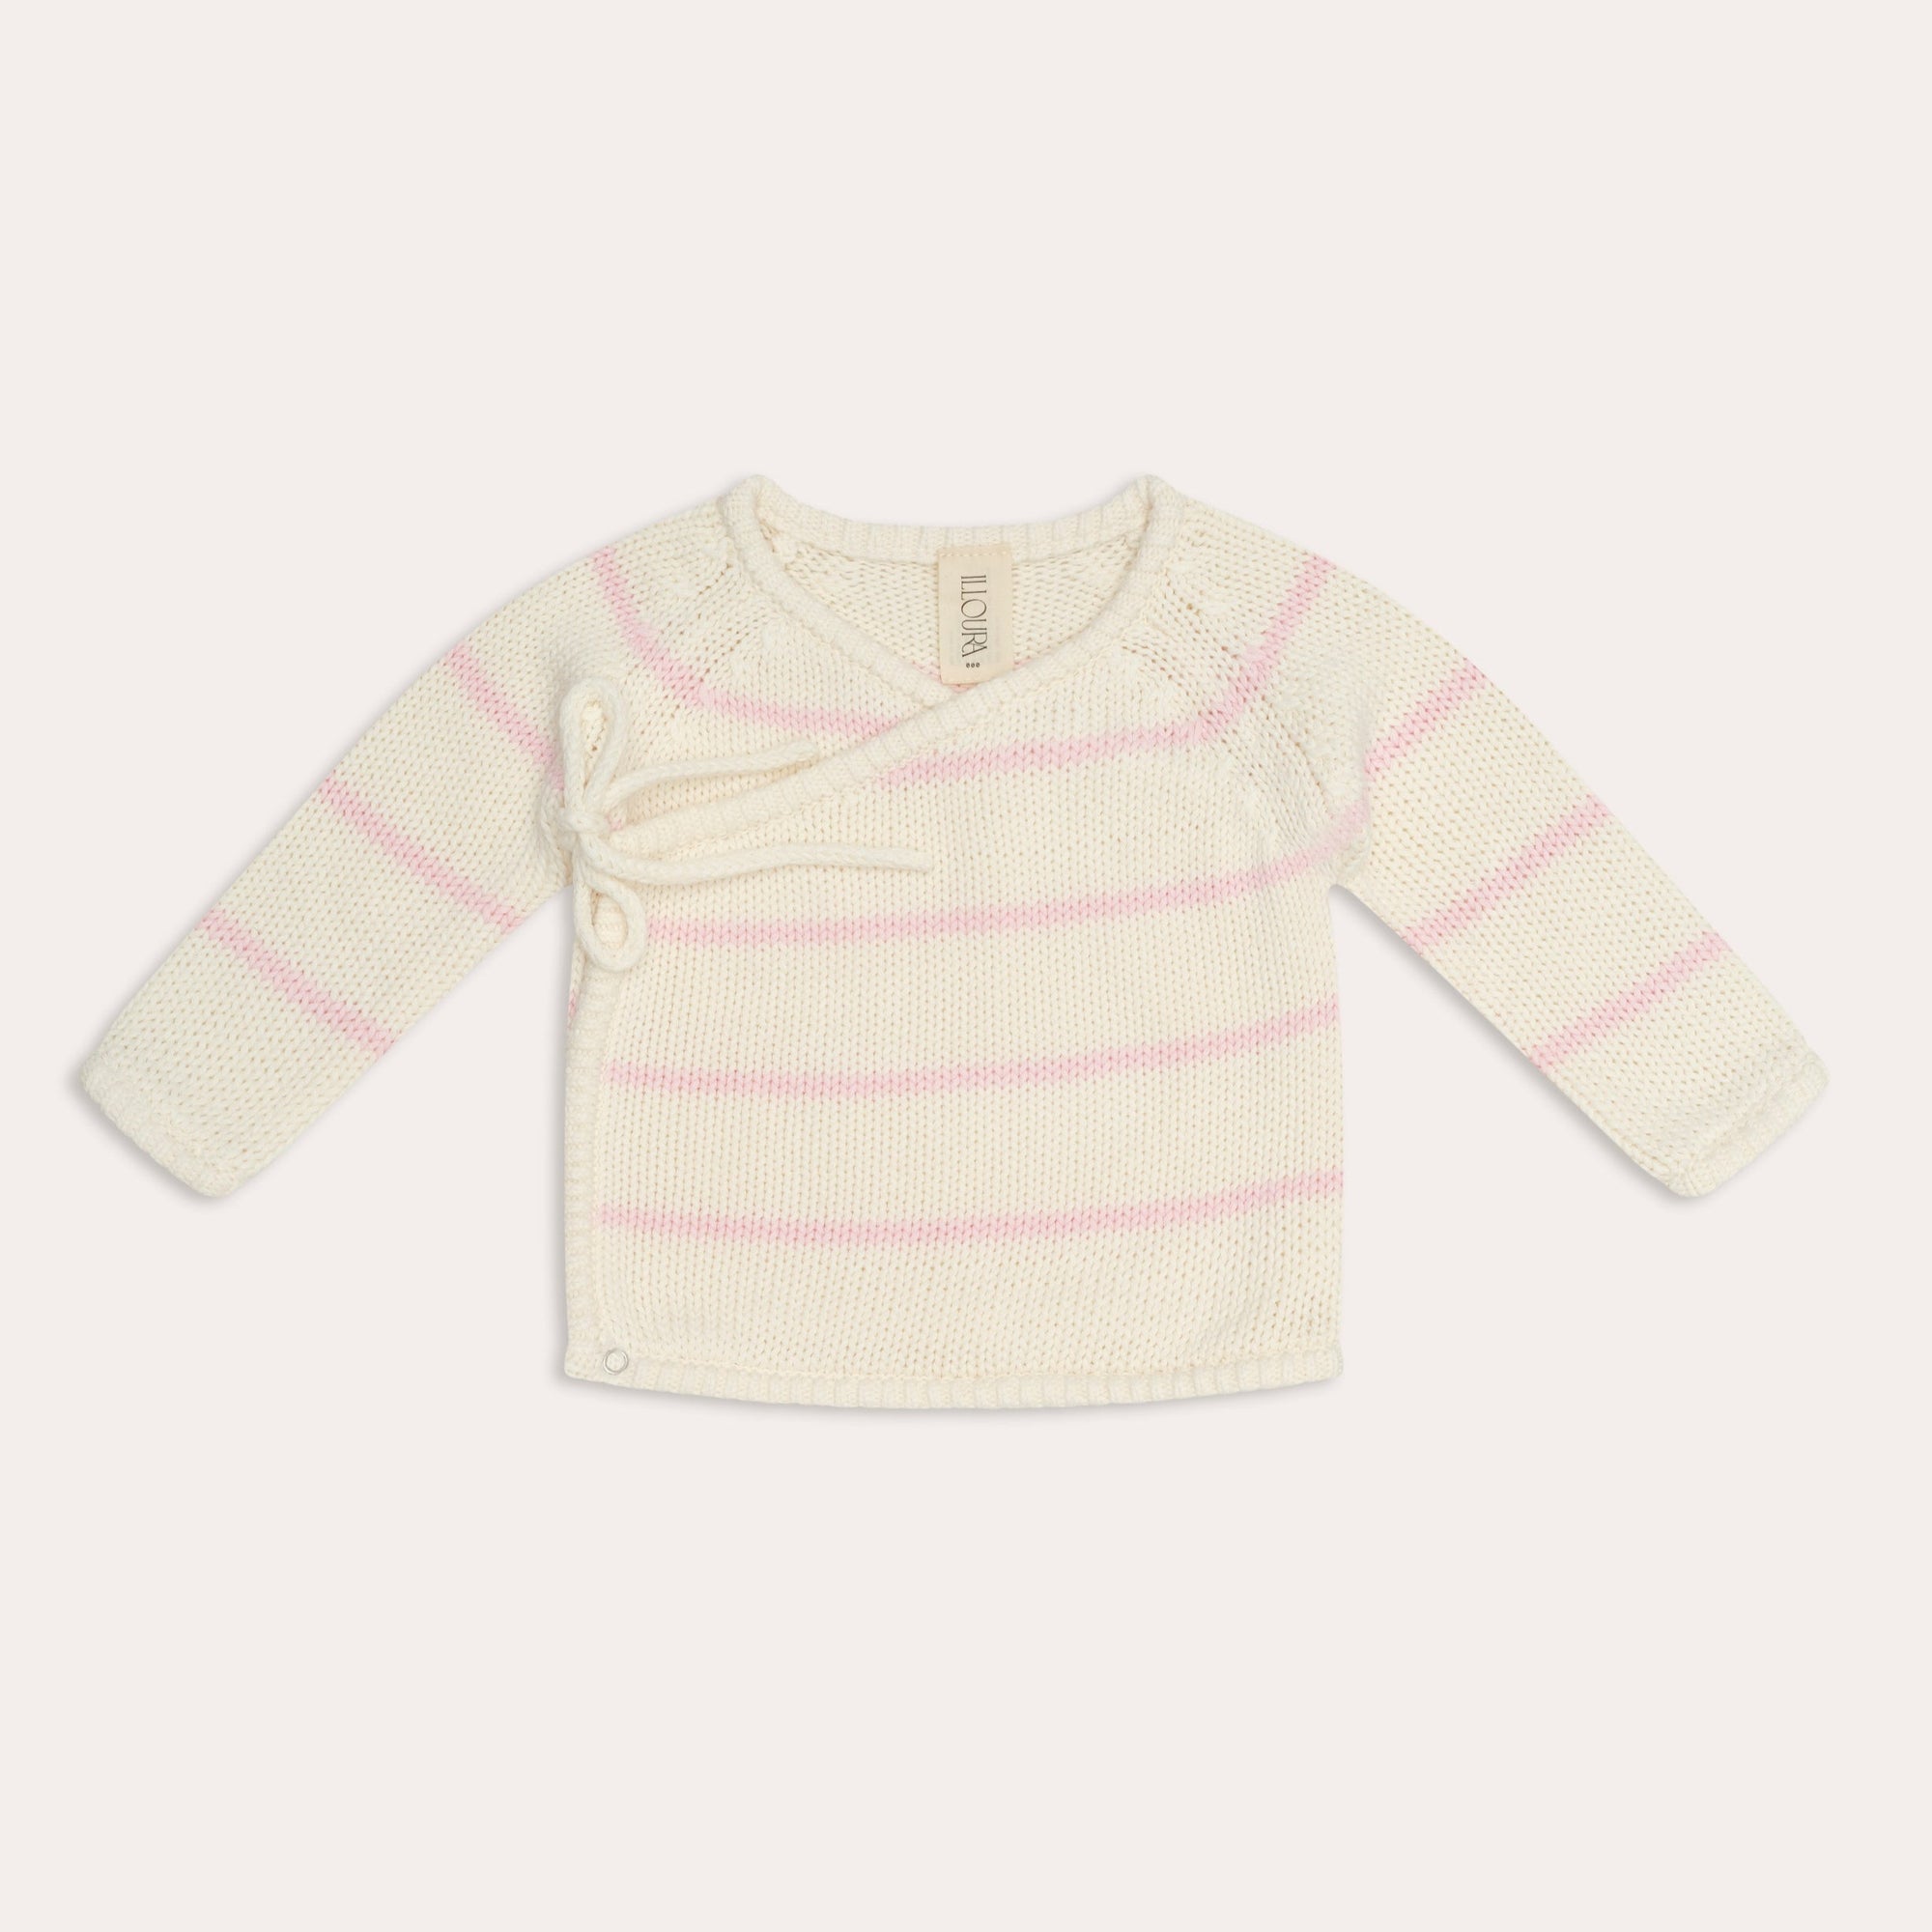 An illoura knit poet jumper with a pink and white stripe, perfect for layering.